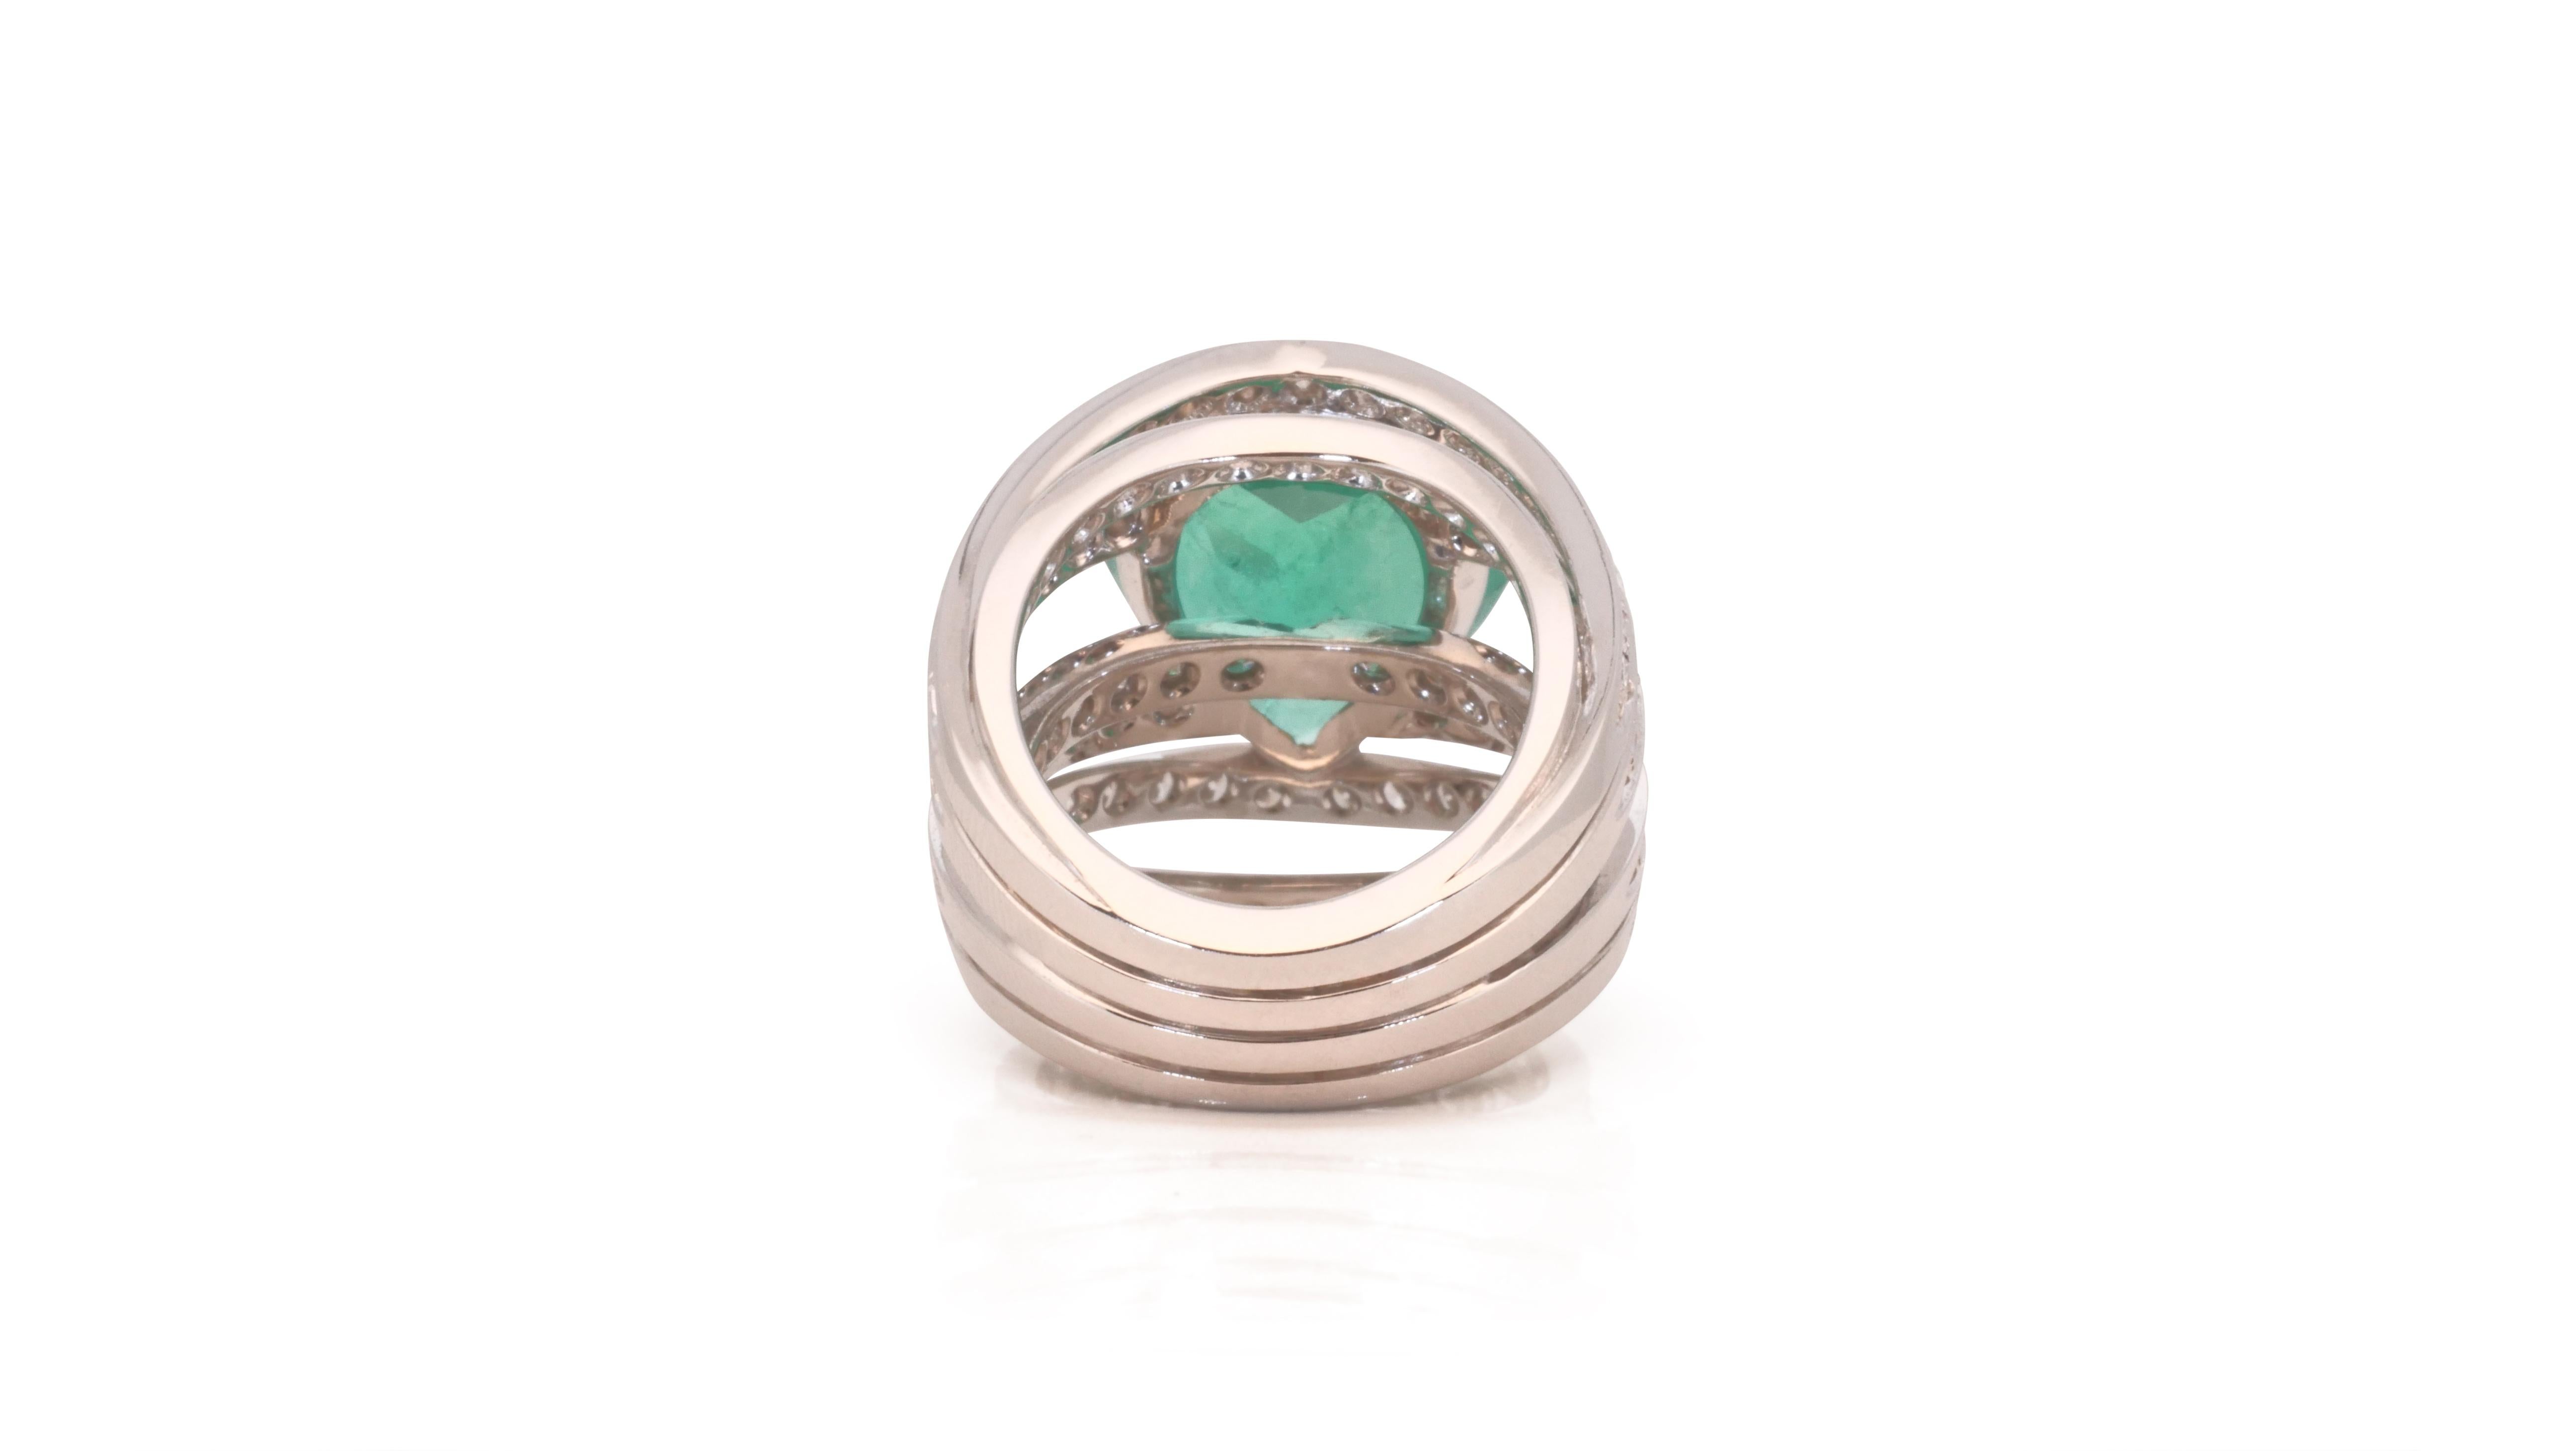 18k White Gold Heart Dome Ring 8.51 Carat Natural Emerald and Diamonds Grs Cert For Sale 1